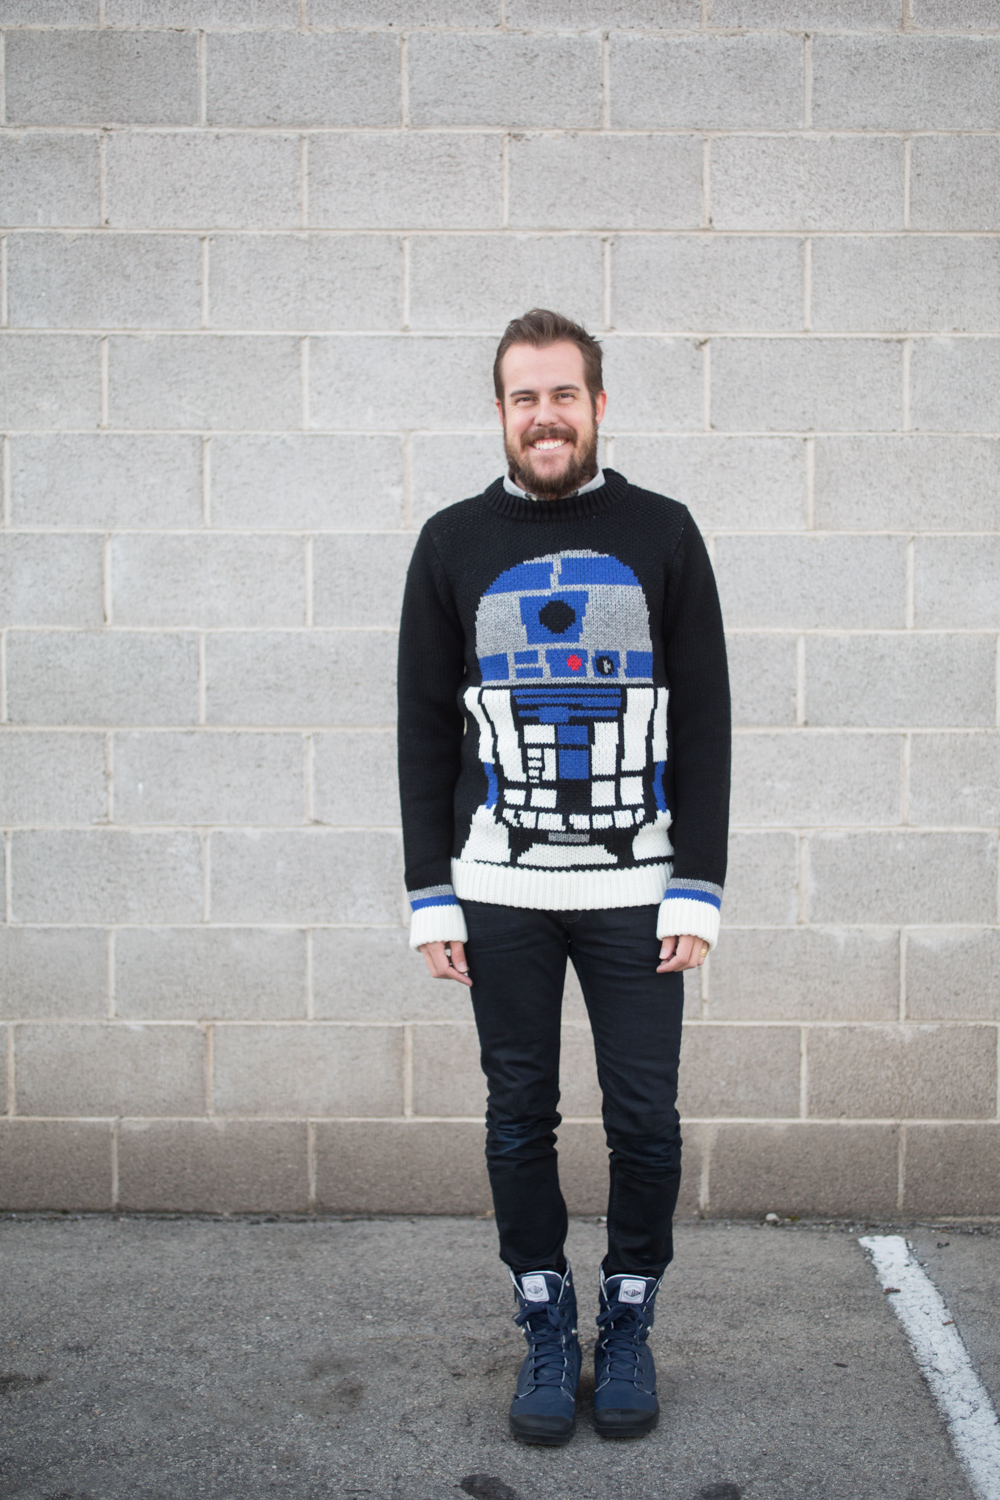 Elevnises r2d2 star wars sweater from Revolve clothing